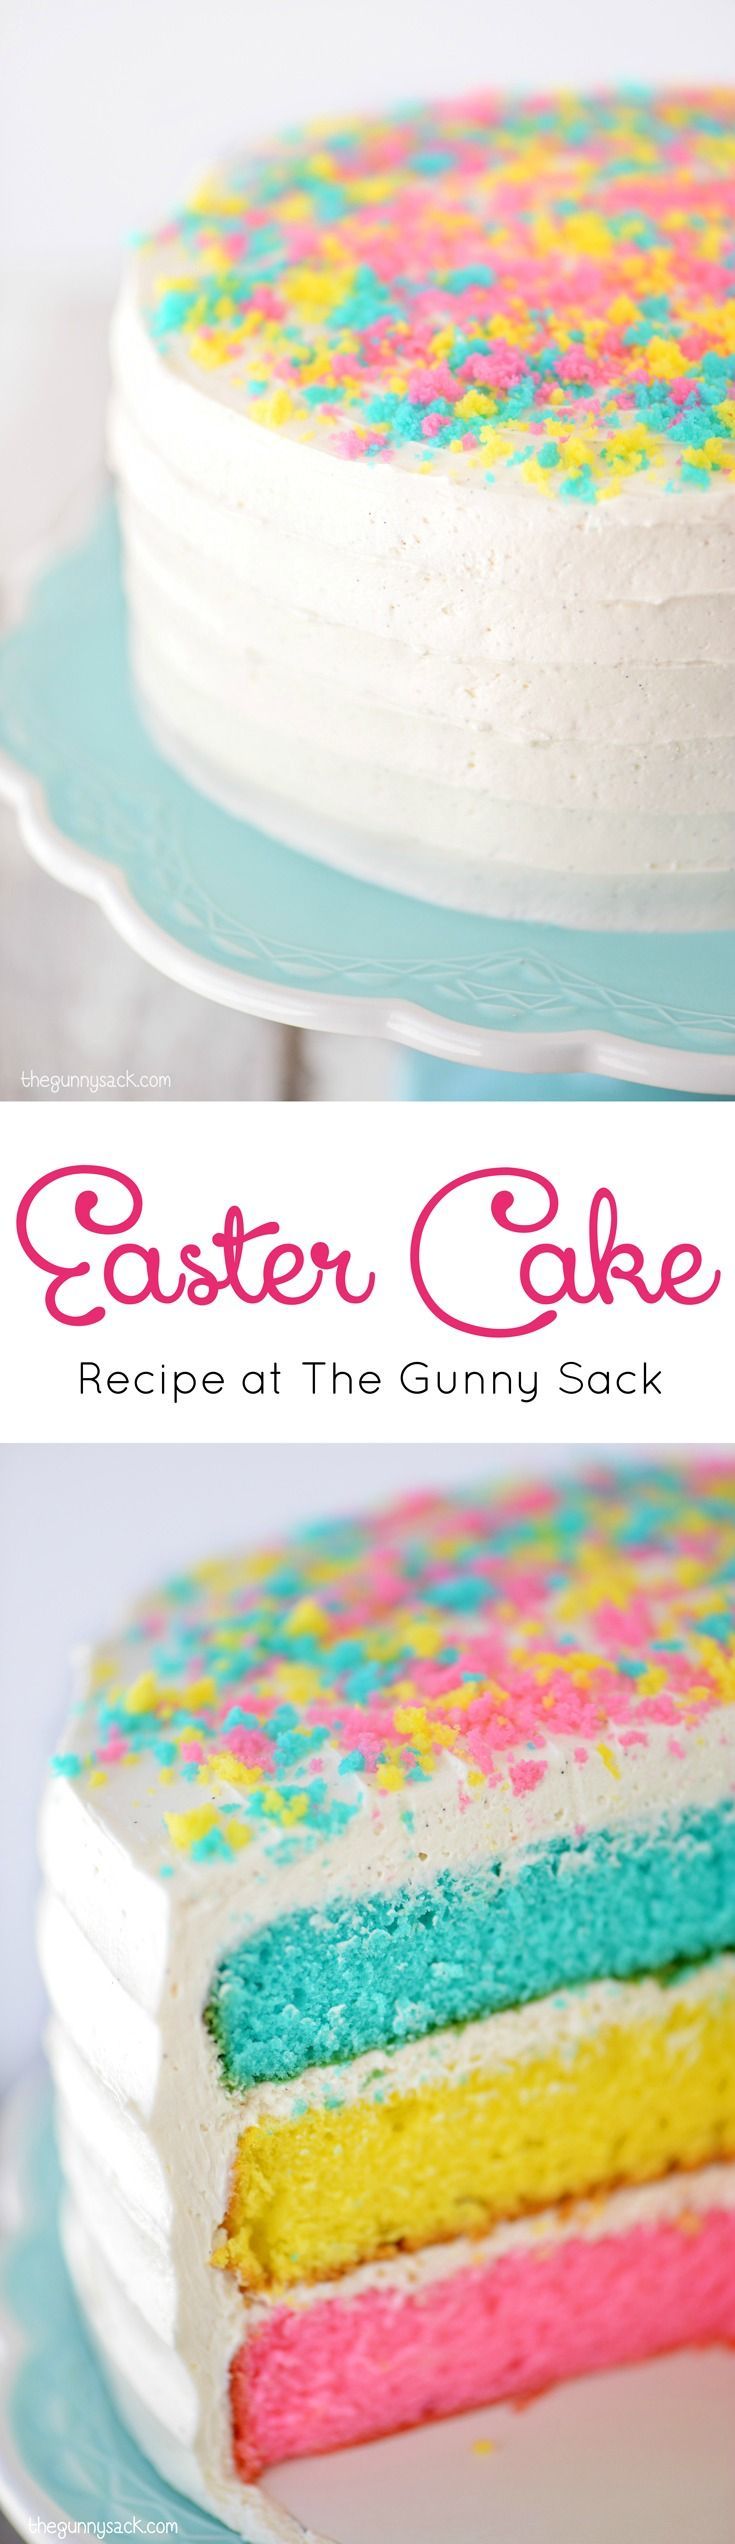 This Easter Cake recipe is easy to make, pretty to look at and fun to eat! It is covered with a fluffy vanilla bean frosting.